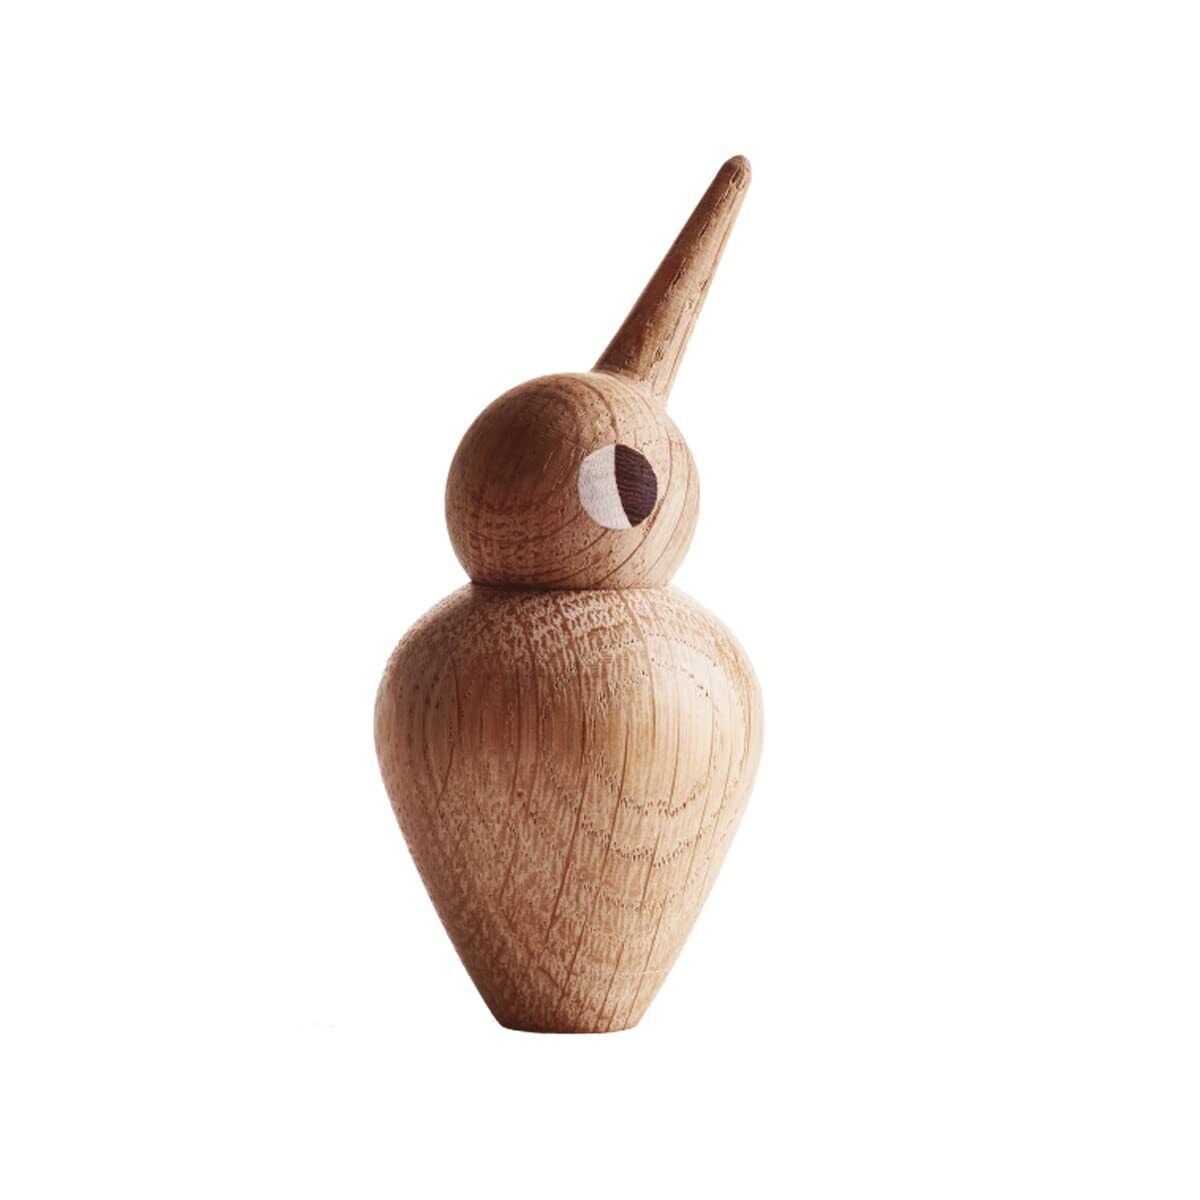 Architectmade | Kristian Vedel | Bird | Small | Natural Wood